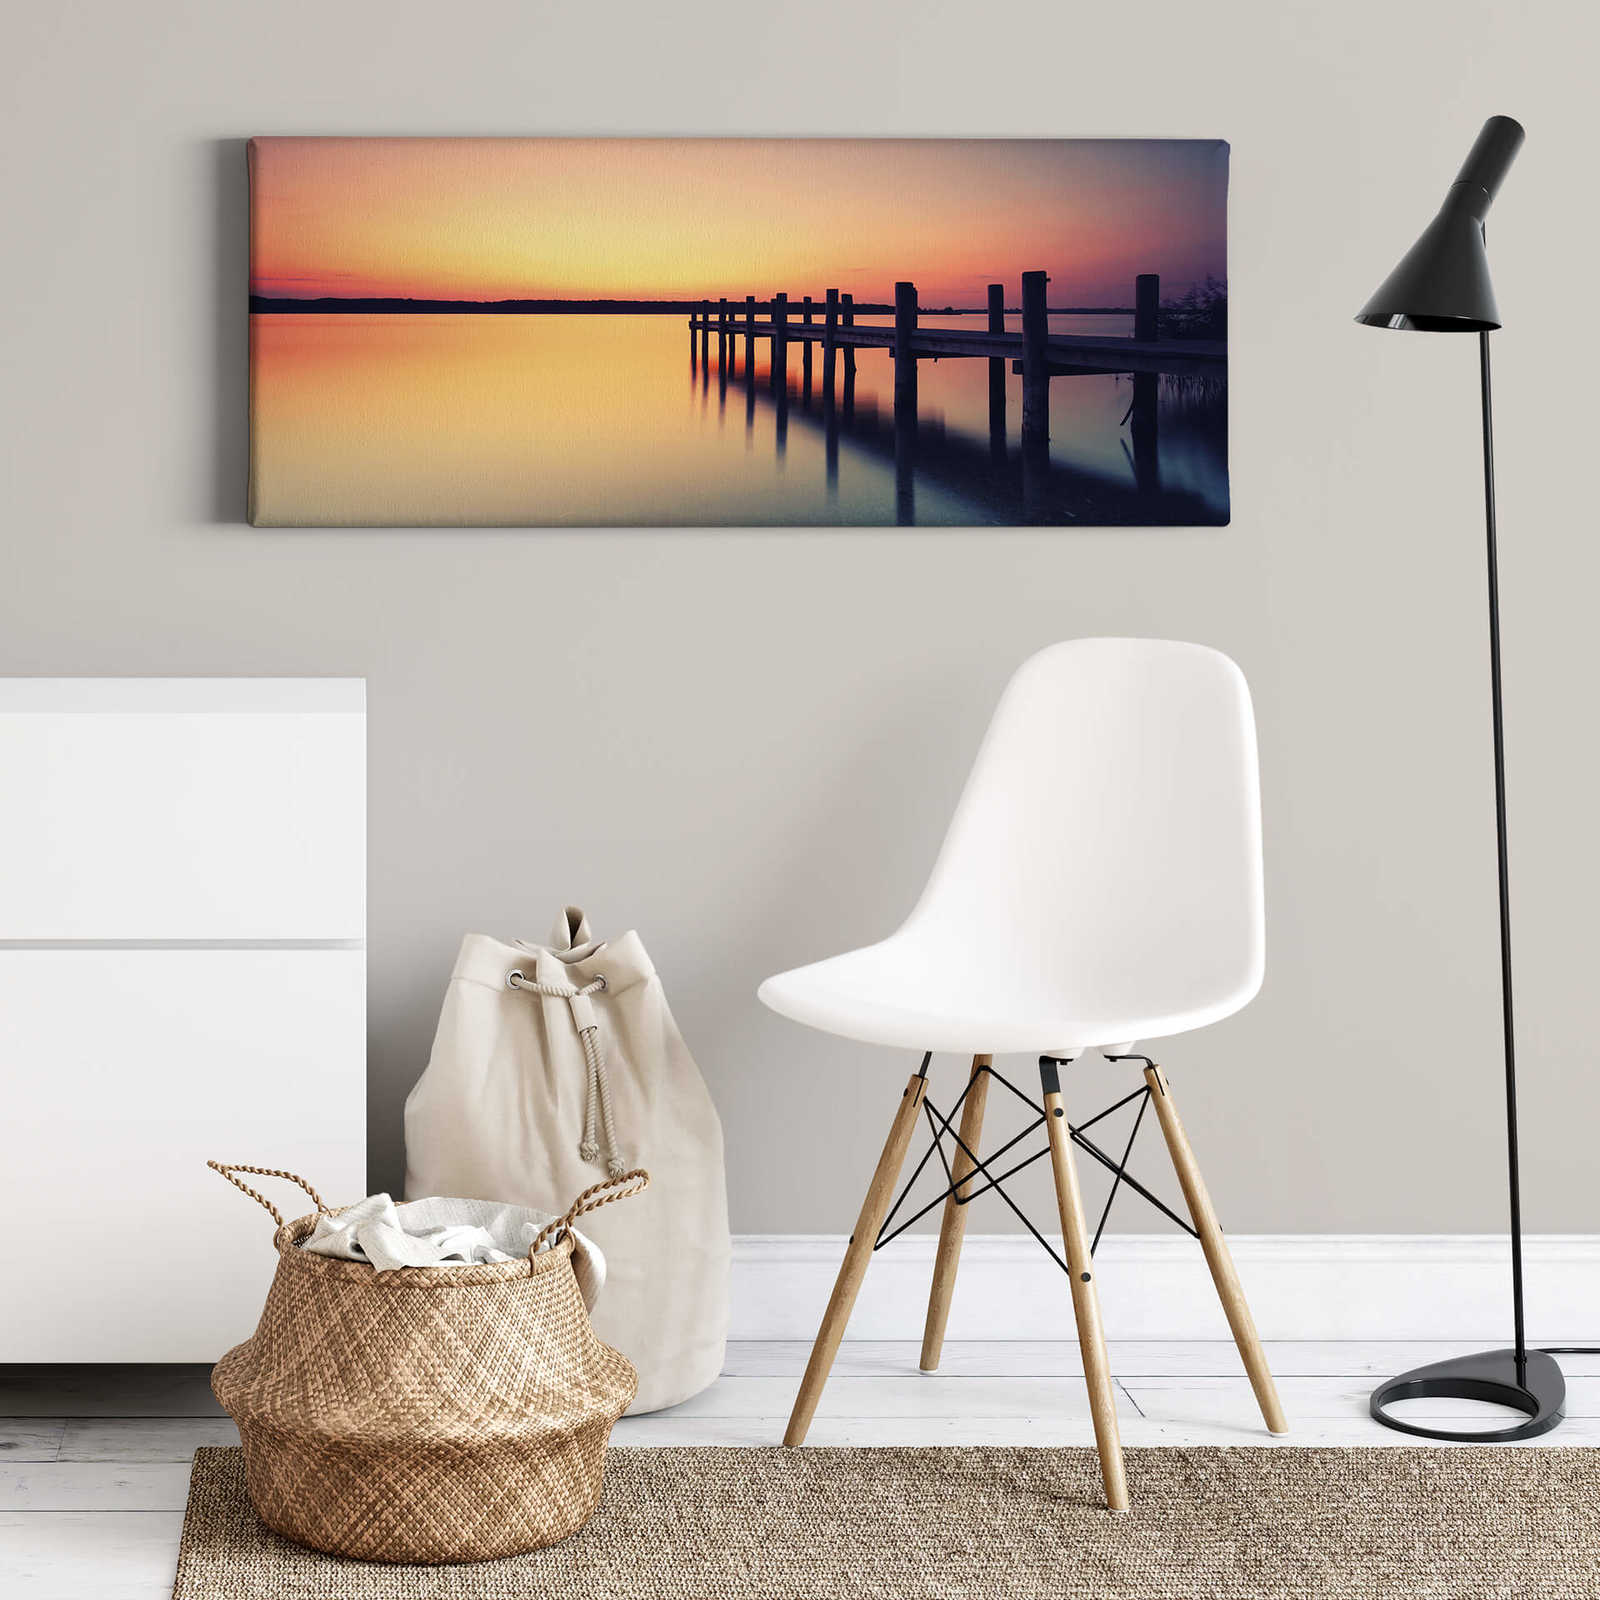             Panoramic canvas print of a bridge on the water
        